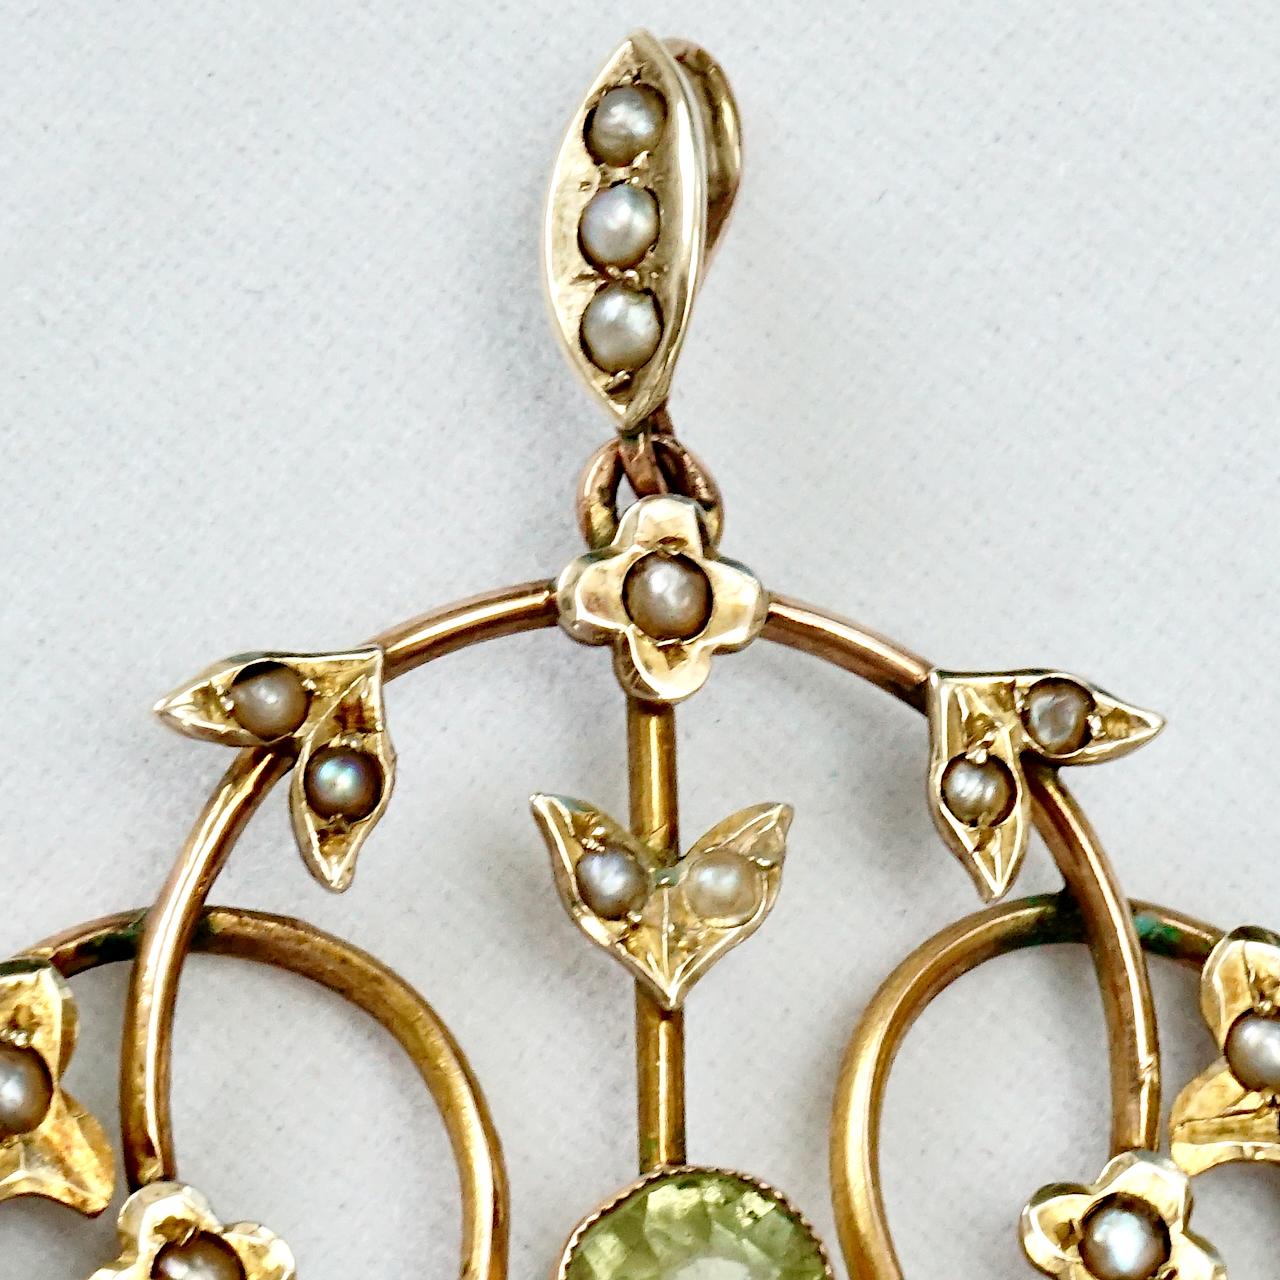 Art Nouveau 9ct gold lavaliere pendant with leaf and flower decoration, and featuring two lovely peridot paste stones and natural seed pearls. The peridots are bezel set with millgrain surround decoration. The pendant is a combination of yellow and